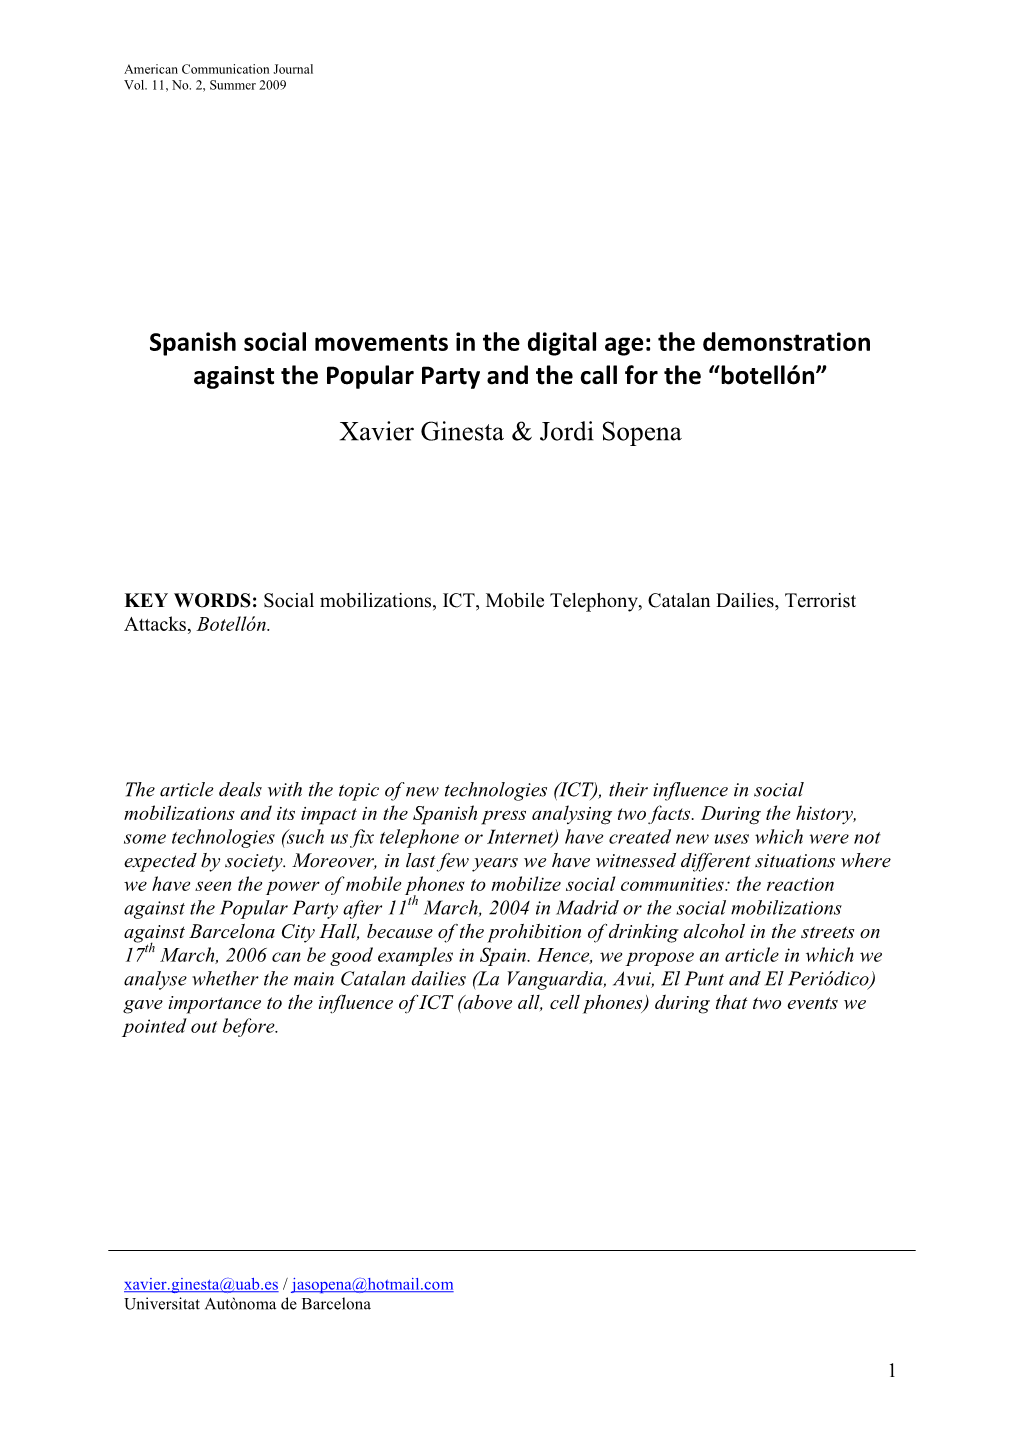 Spanish Social Movements in the Digital Age: the Demonstration Against the Popular Party and the Call for the “Botellón”